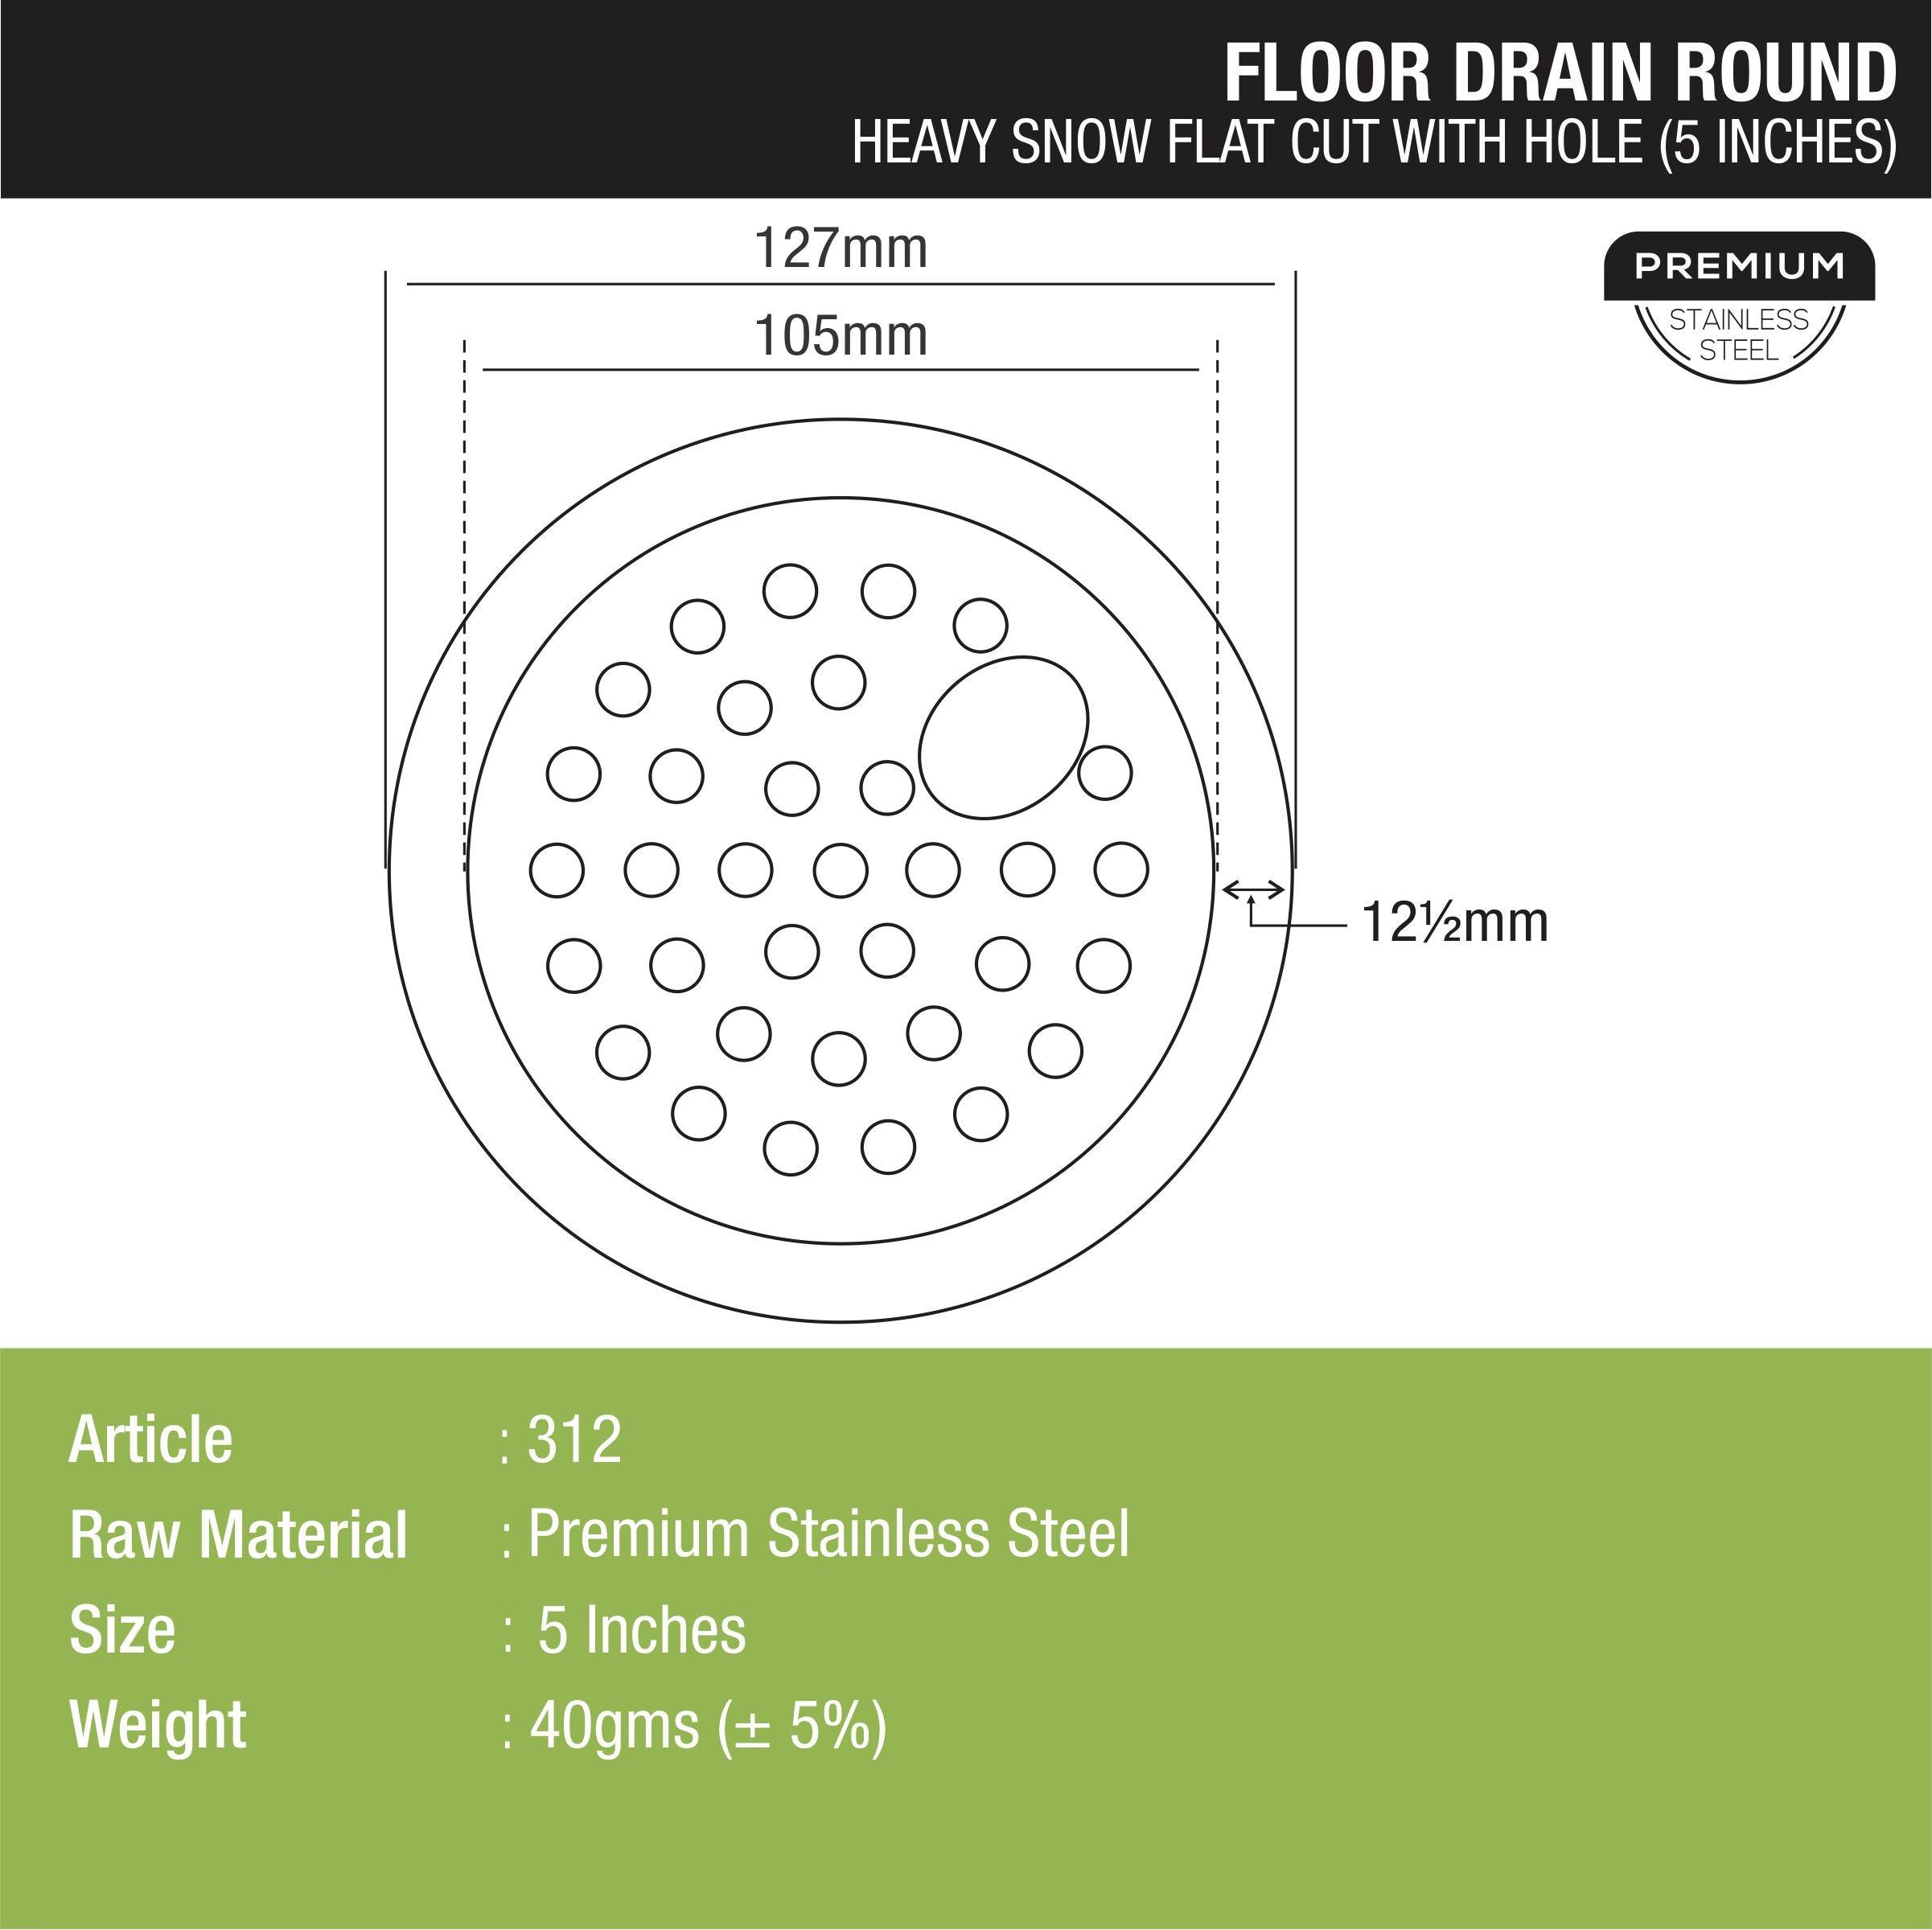 Heavy Snow Round Flat Cut Floor Drain with Hole (5 inches) dimensions and sizes